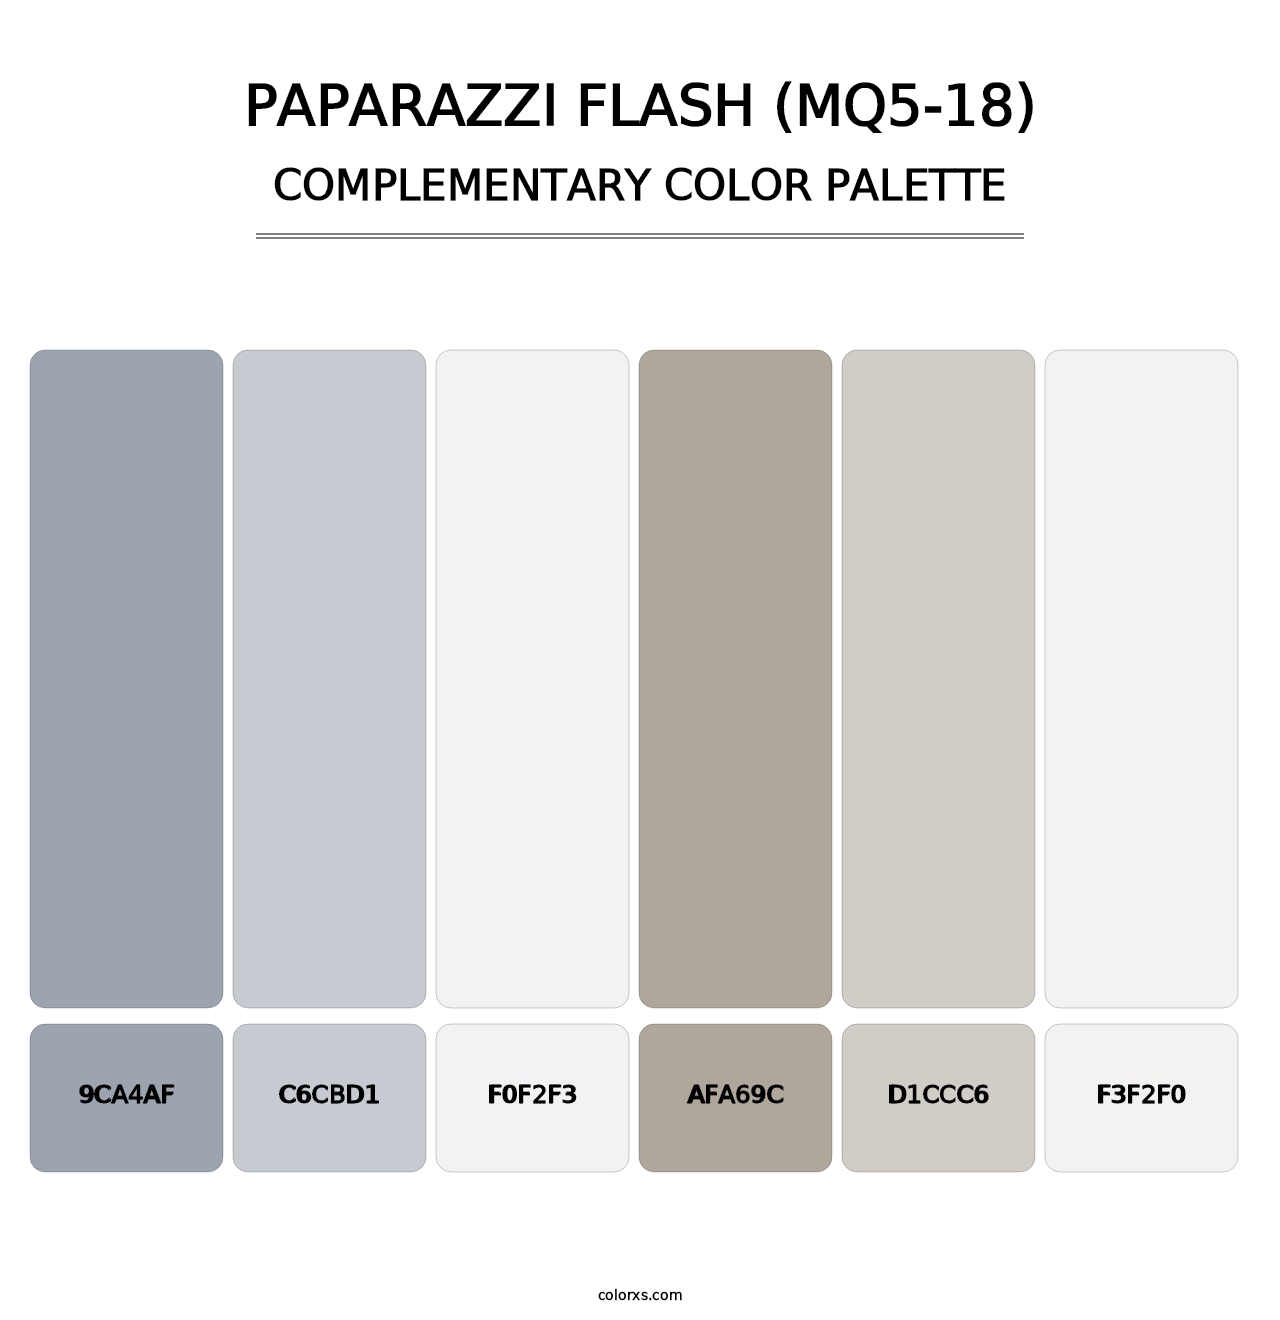 Paparazzi Flash (MQ5-18) - Complementary Color Palette